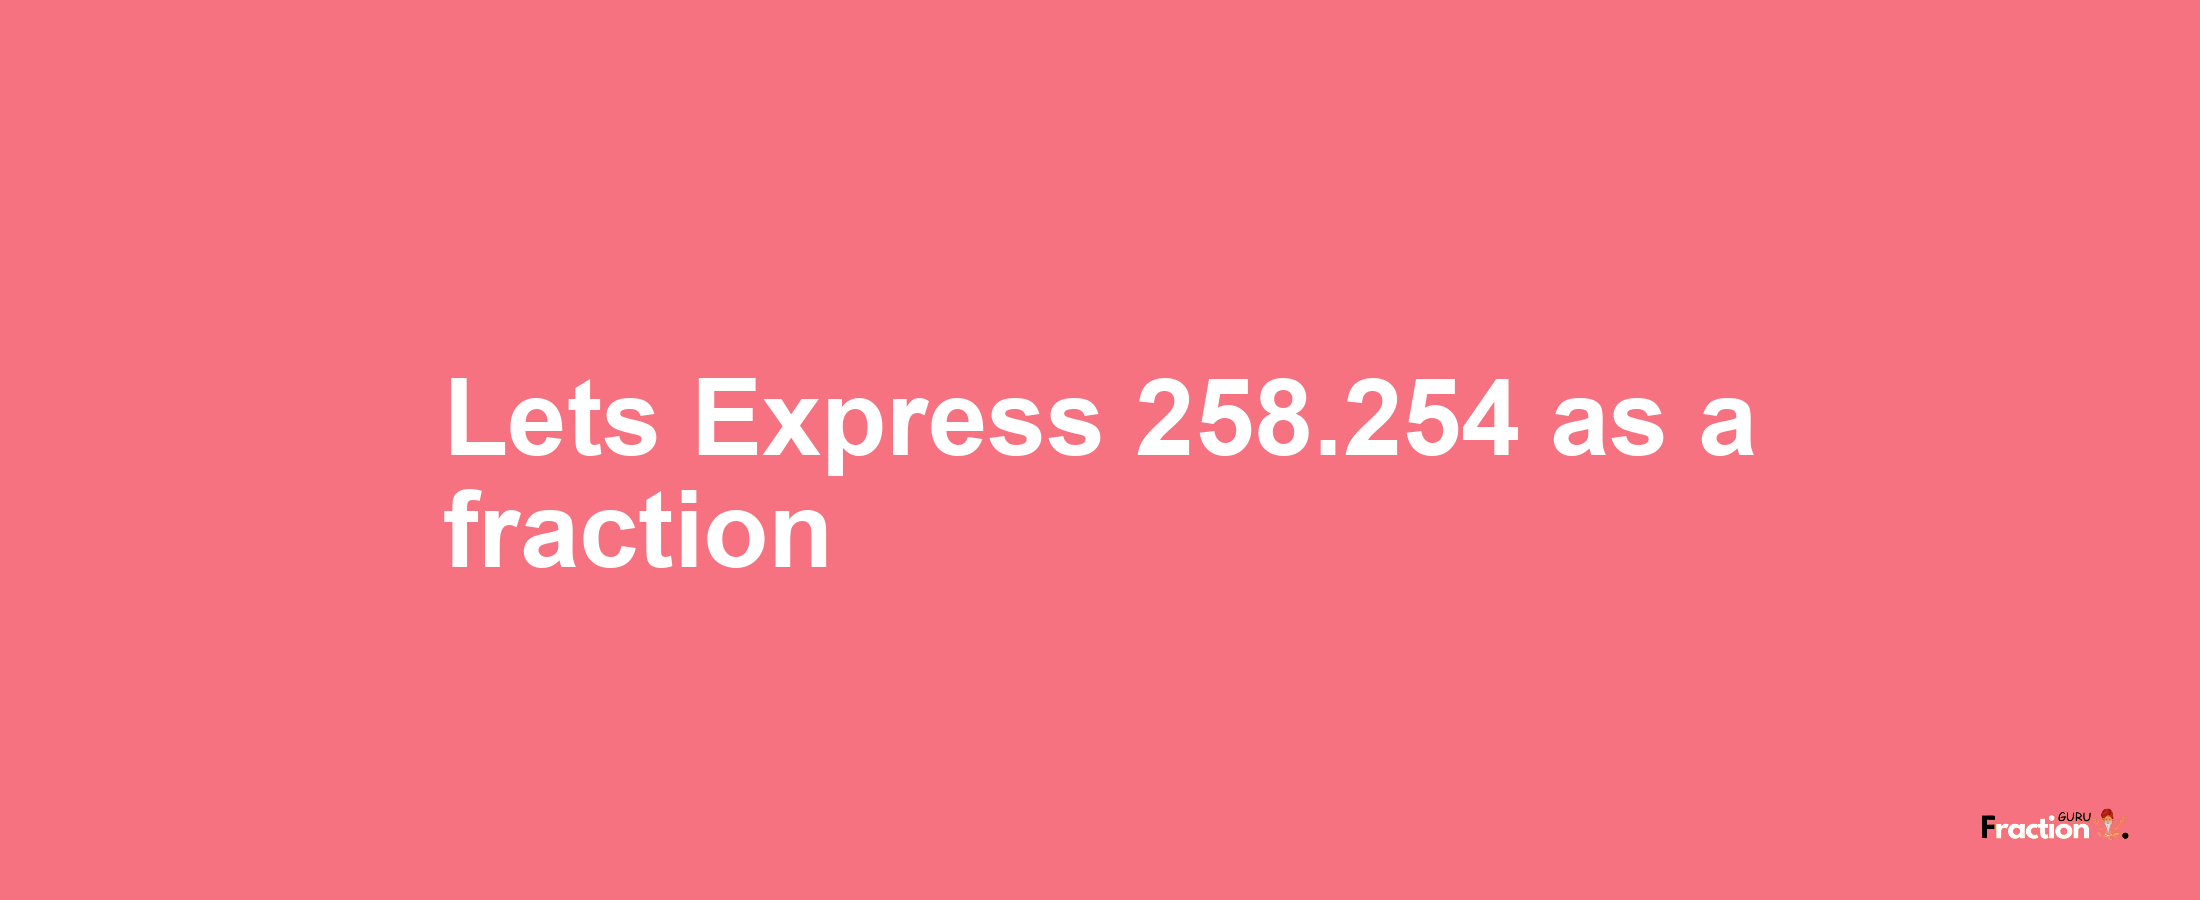 Lets Express 258.254 as afraction